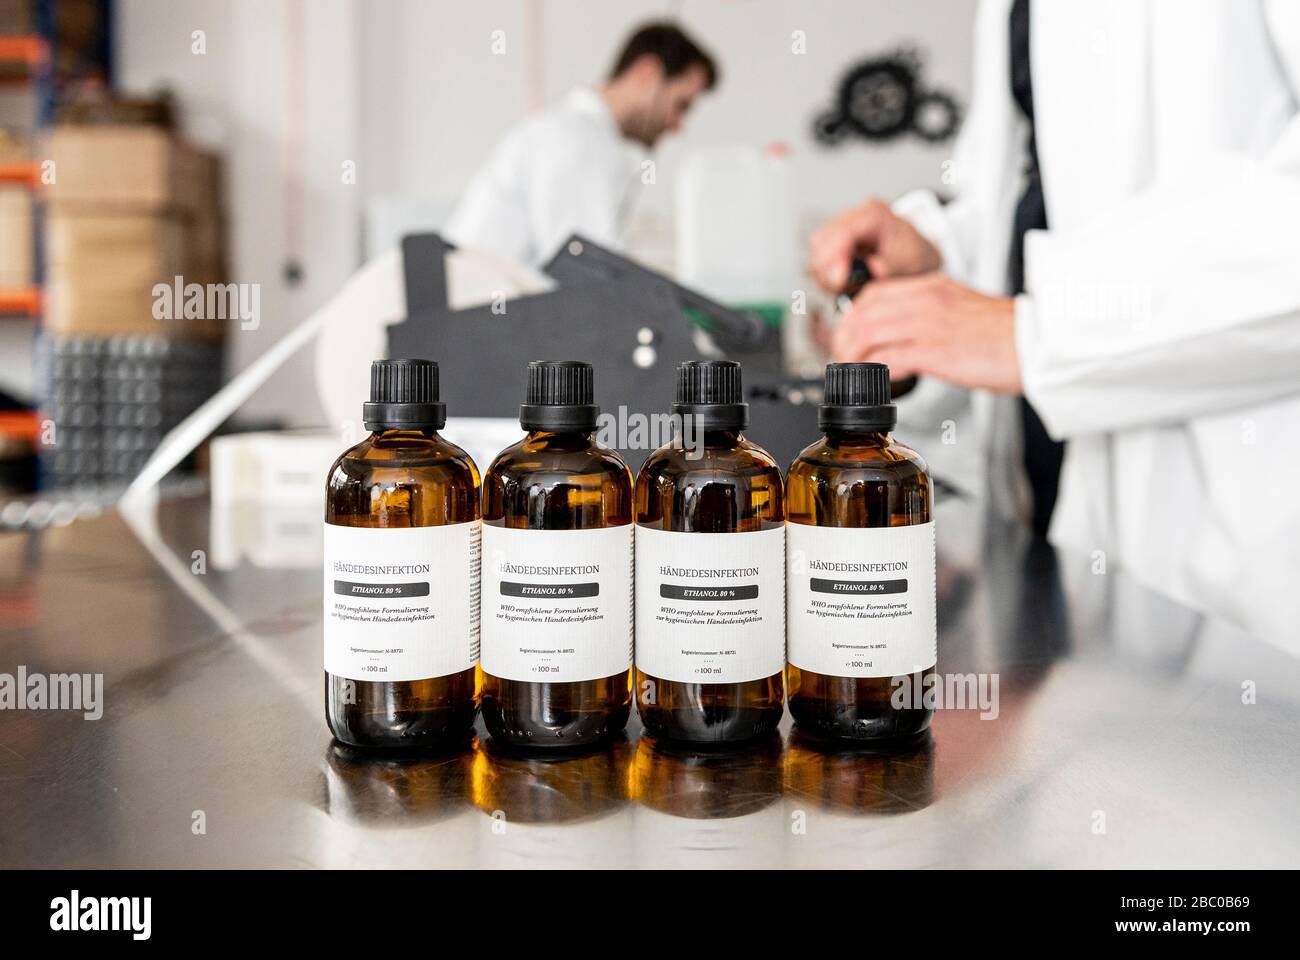 Berlin, Germany. 30th Mar, 2020. On a table in the Deutsche Spirituosen Manufaktur are bottles of hand disinfectant. The Deutsche Spirituosen Manufaktur now produces disinfectants because of the coronavirus. Credit: Fabian Sommer/dpa/Alamy Live News Stock Photo